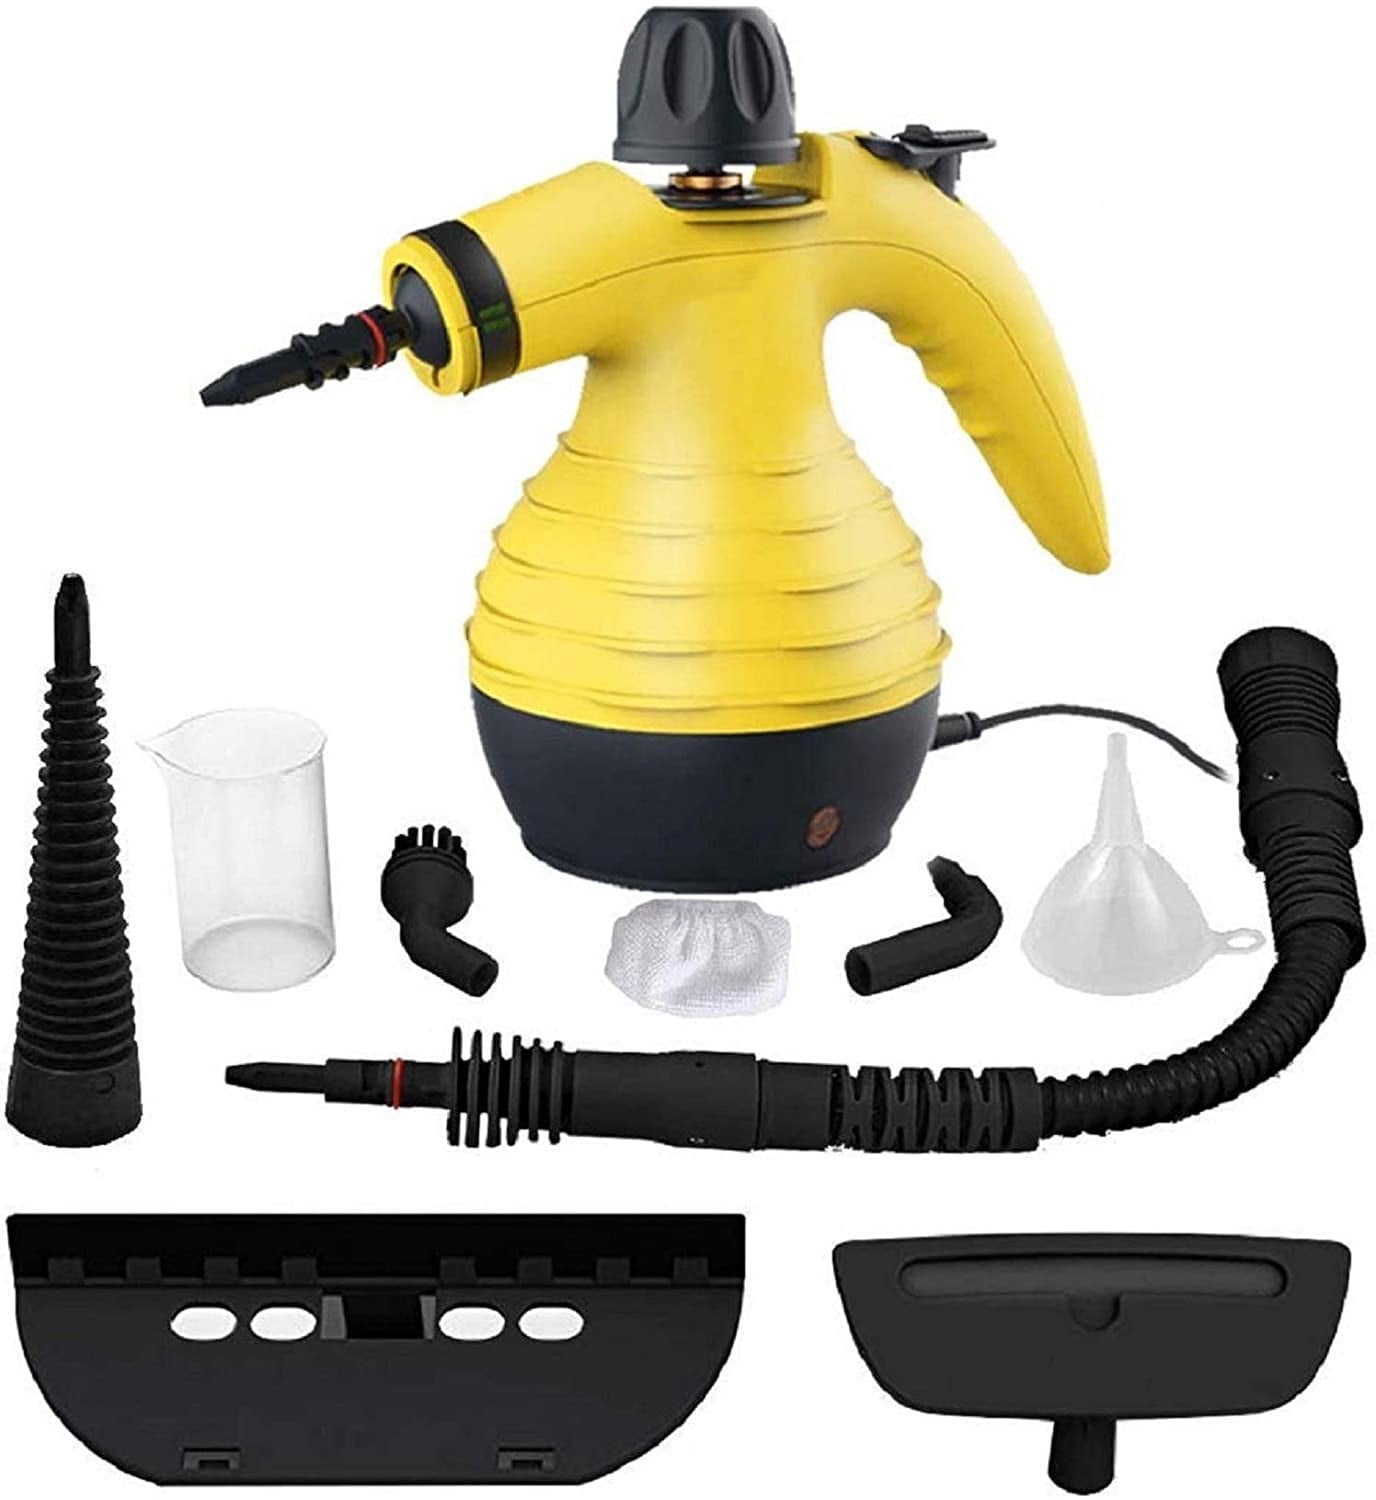 Details about   1050W Steam Cleaner Handheld Multi-Purpose Powerful Steam Portable Multicolor 